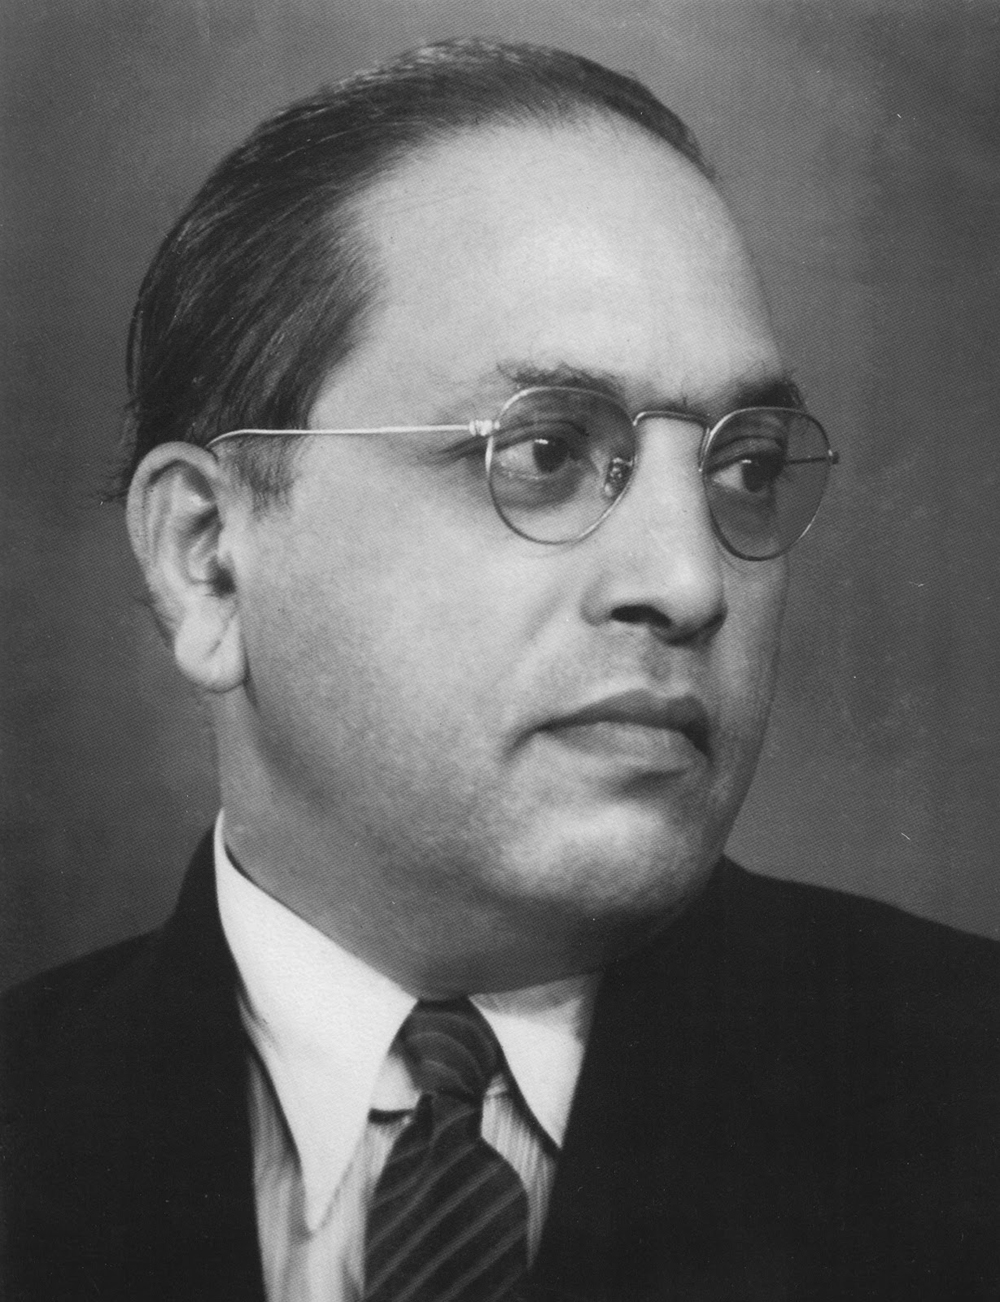 Contrary to BJP's stand, Ambedkar advocated for partition of Kashmir and at another time for a plebiscite in the region.